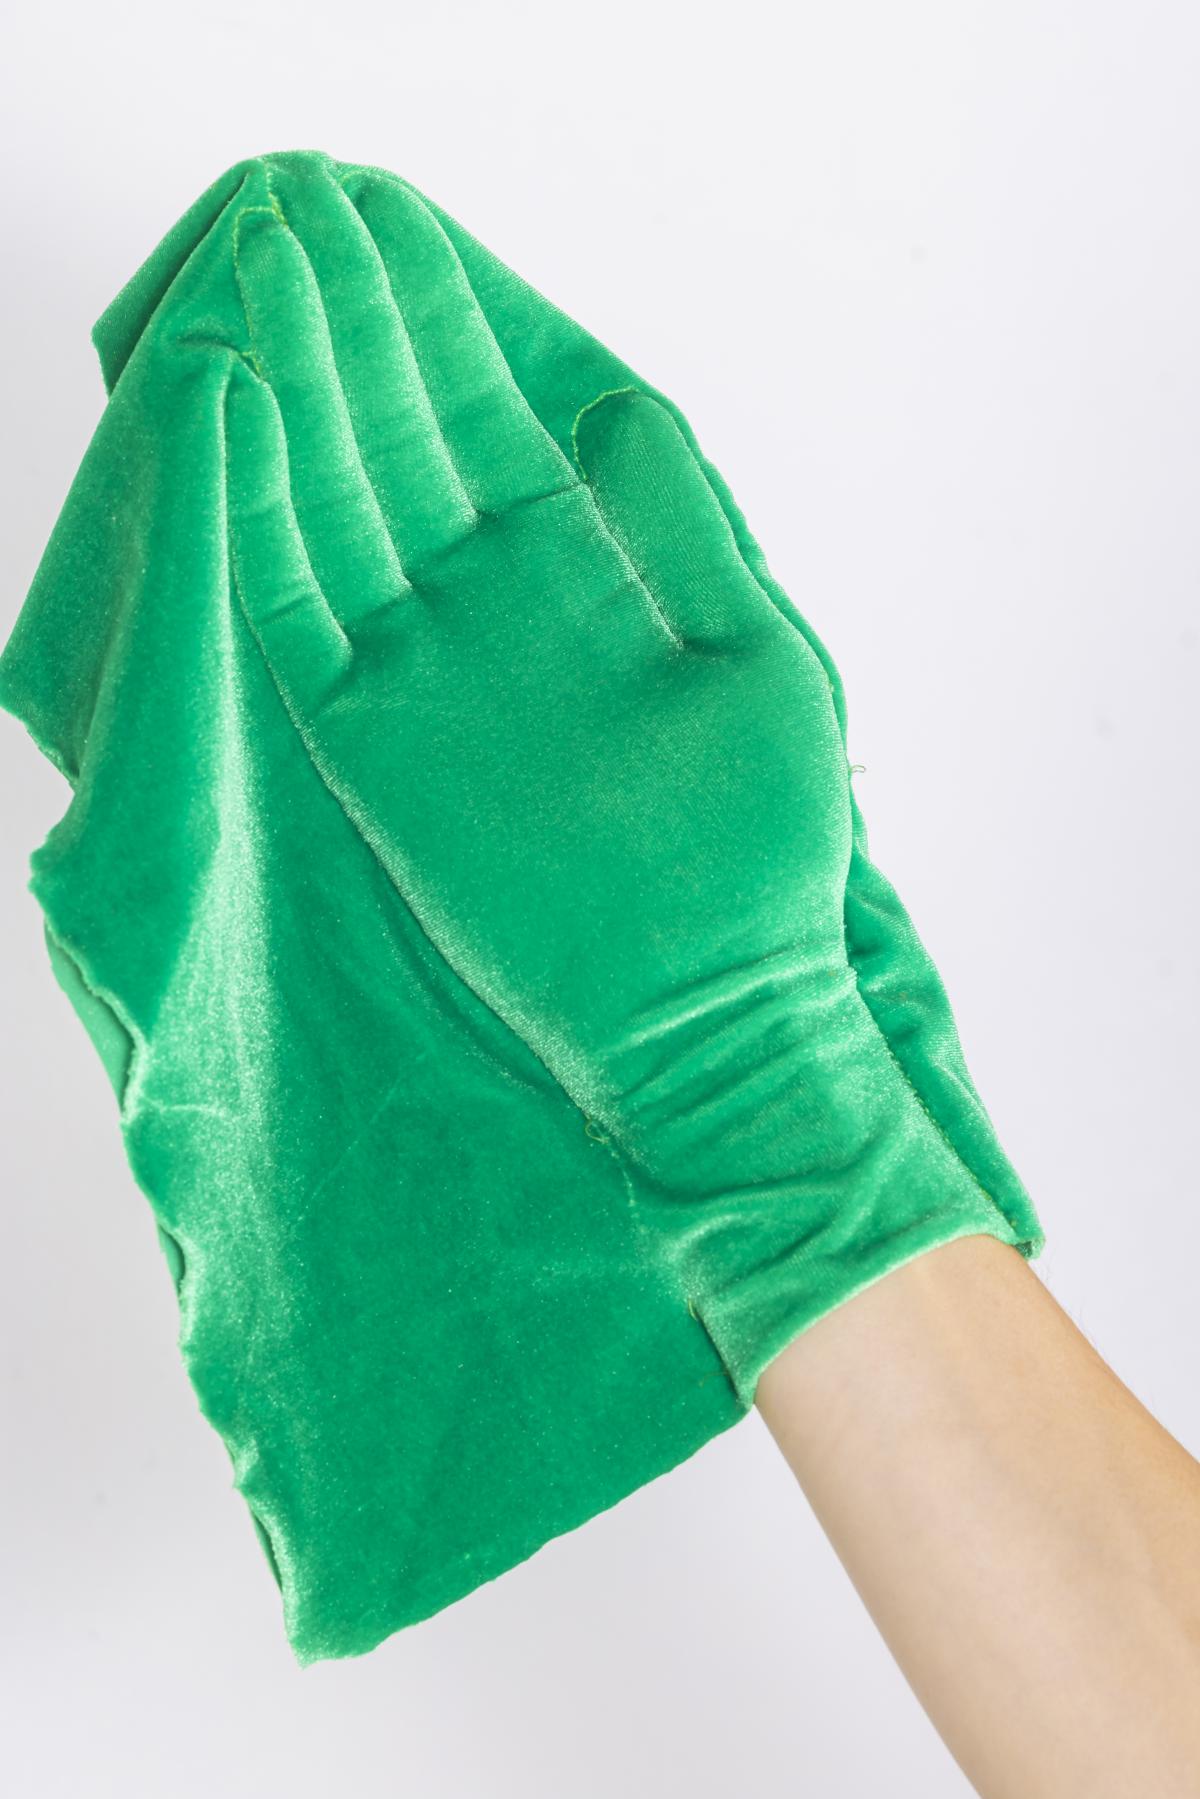 A raised hand and arm as seen from front, where the hand and part of the arm is covered by a beautiful green fabric which shows the outline of the skin.